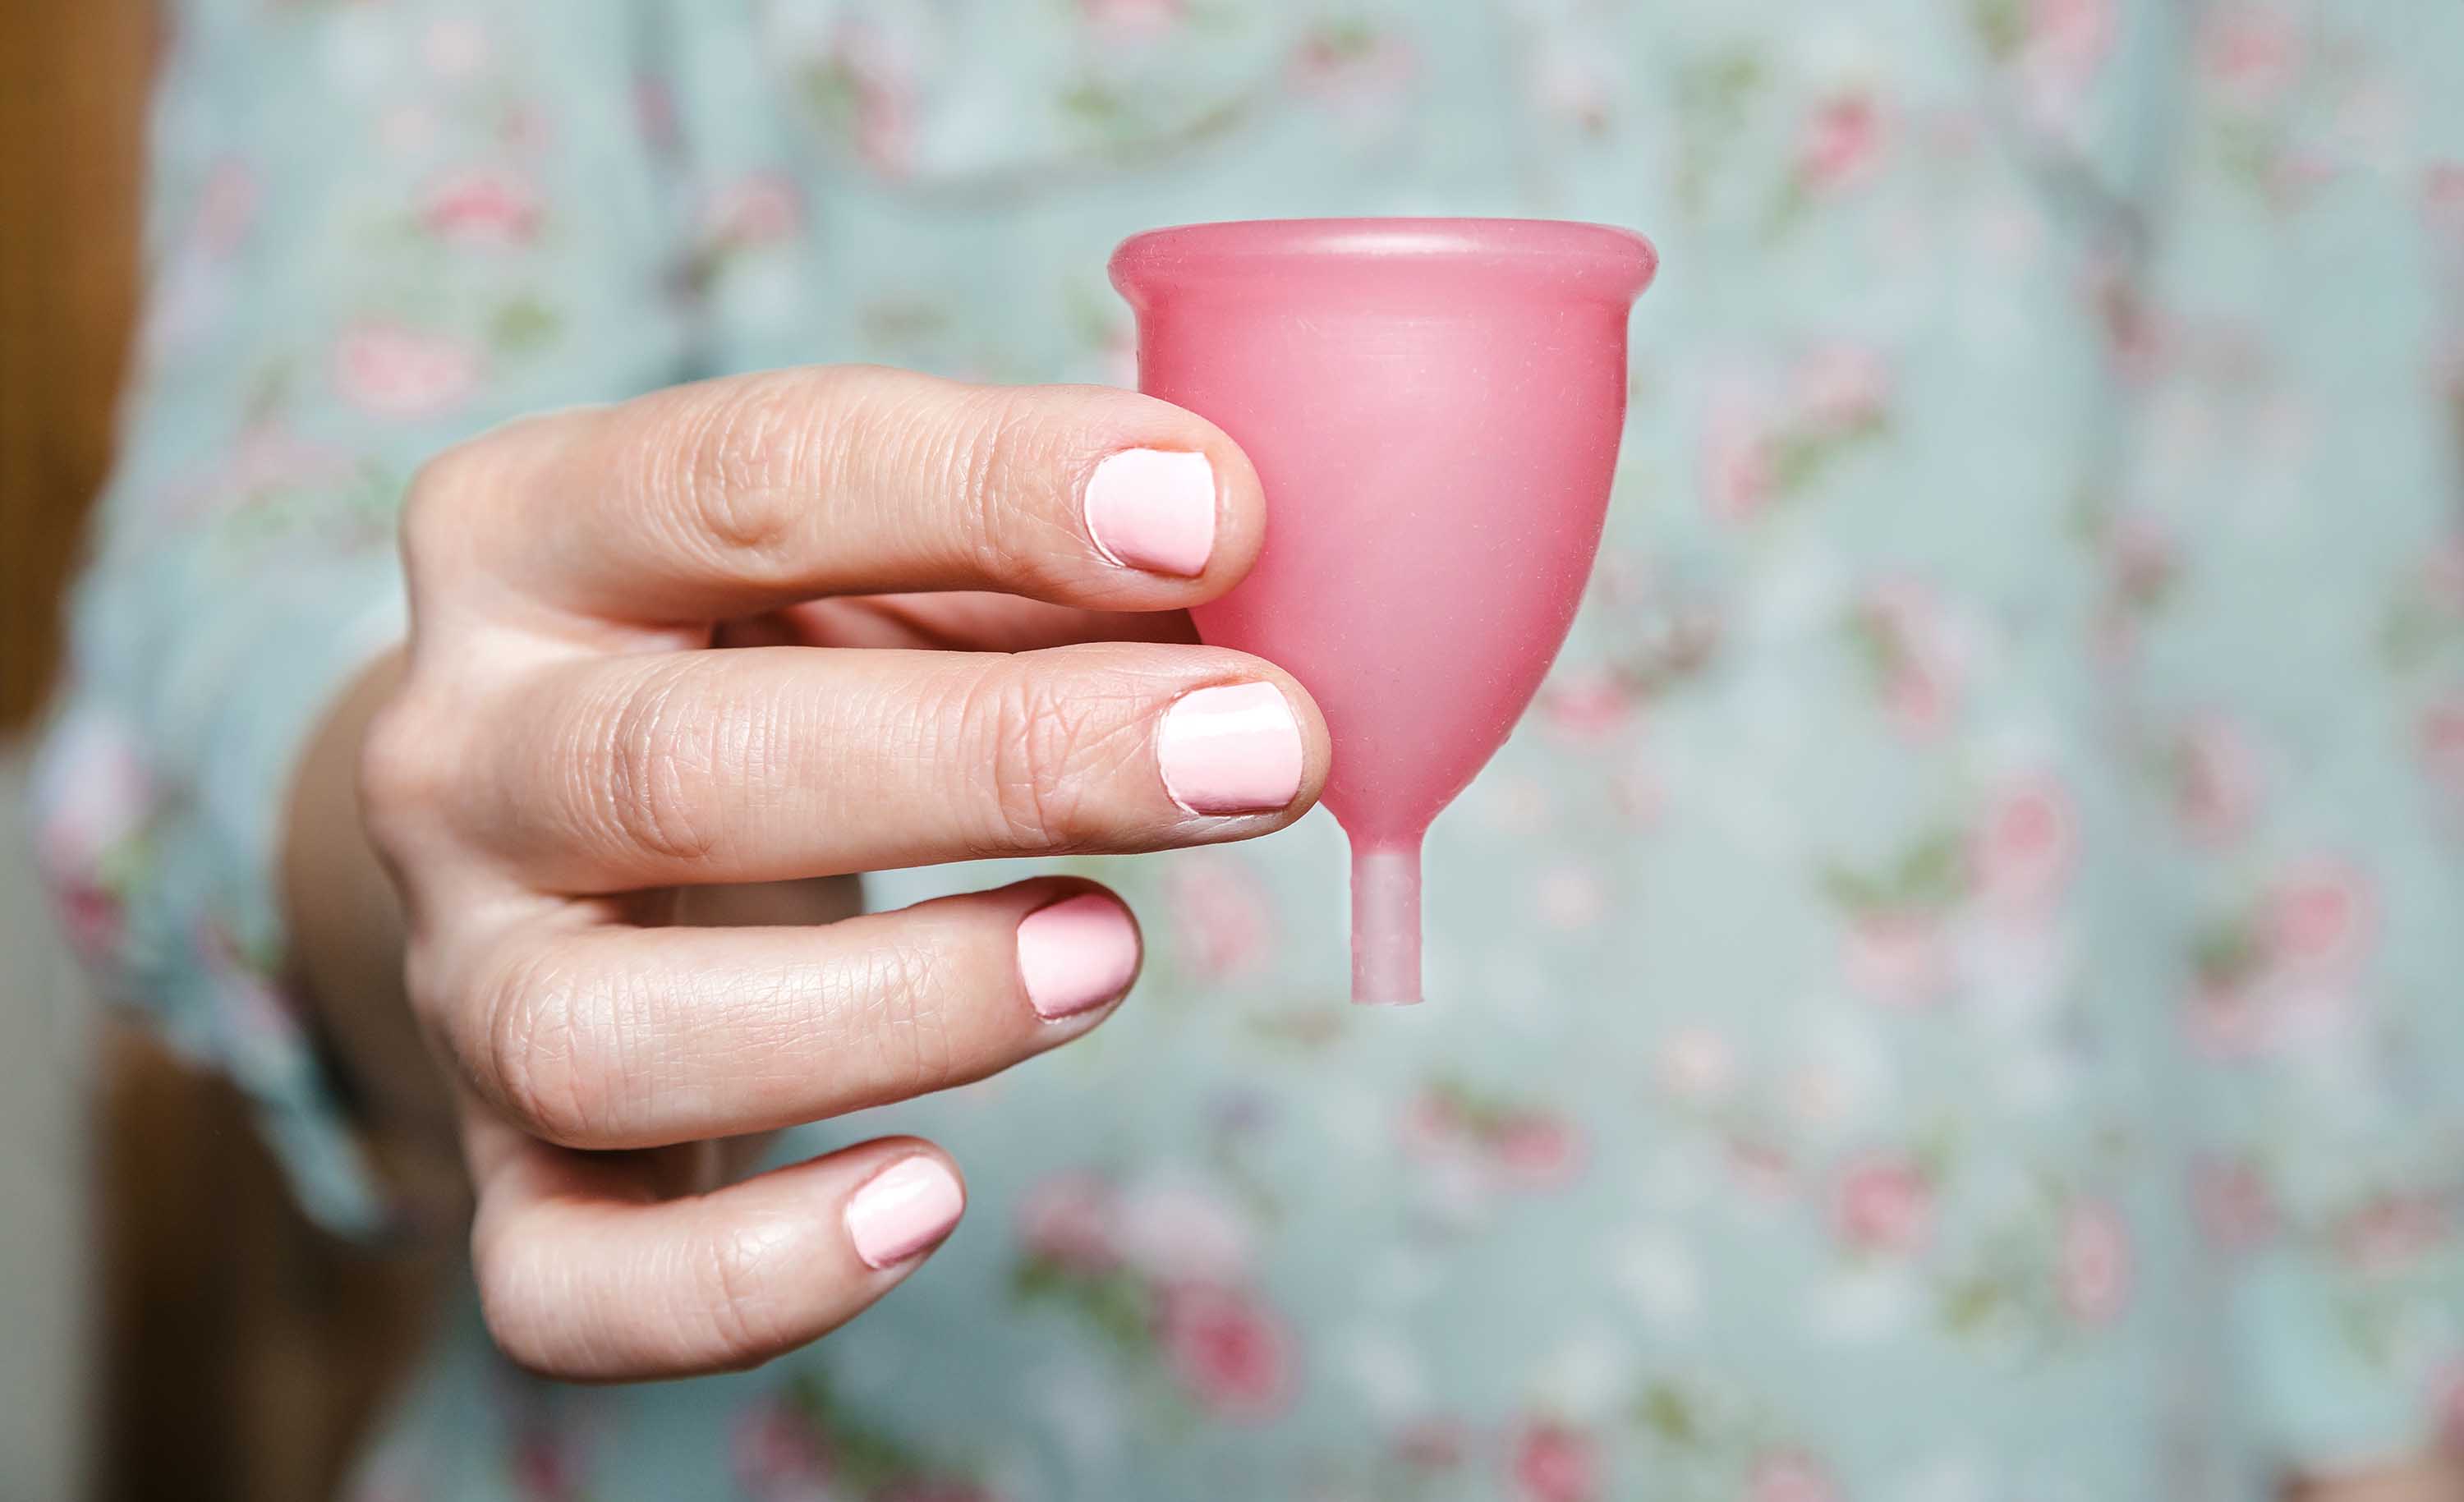 How Are Menstrual Cups Made?